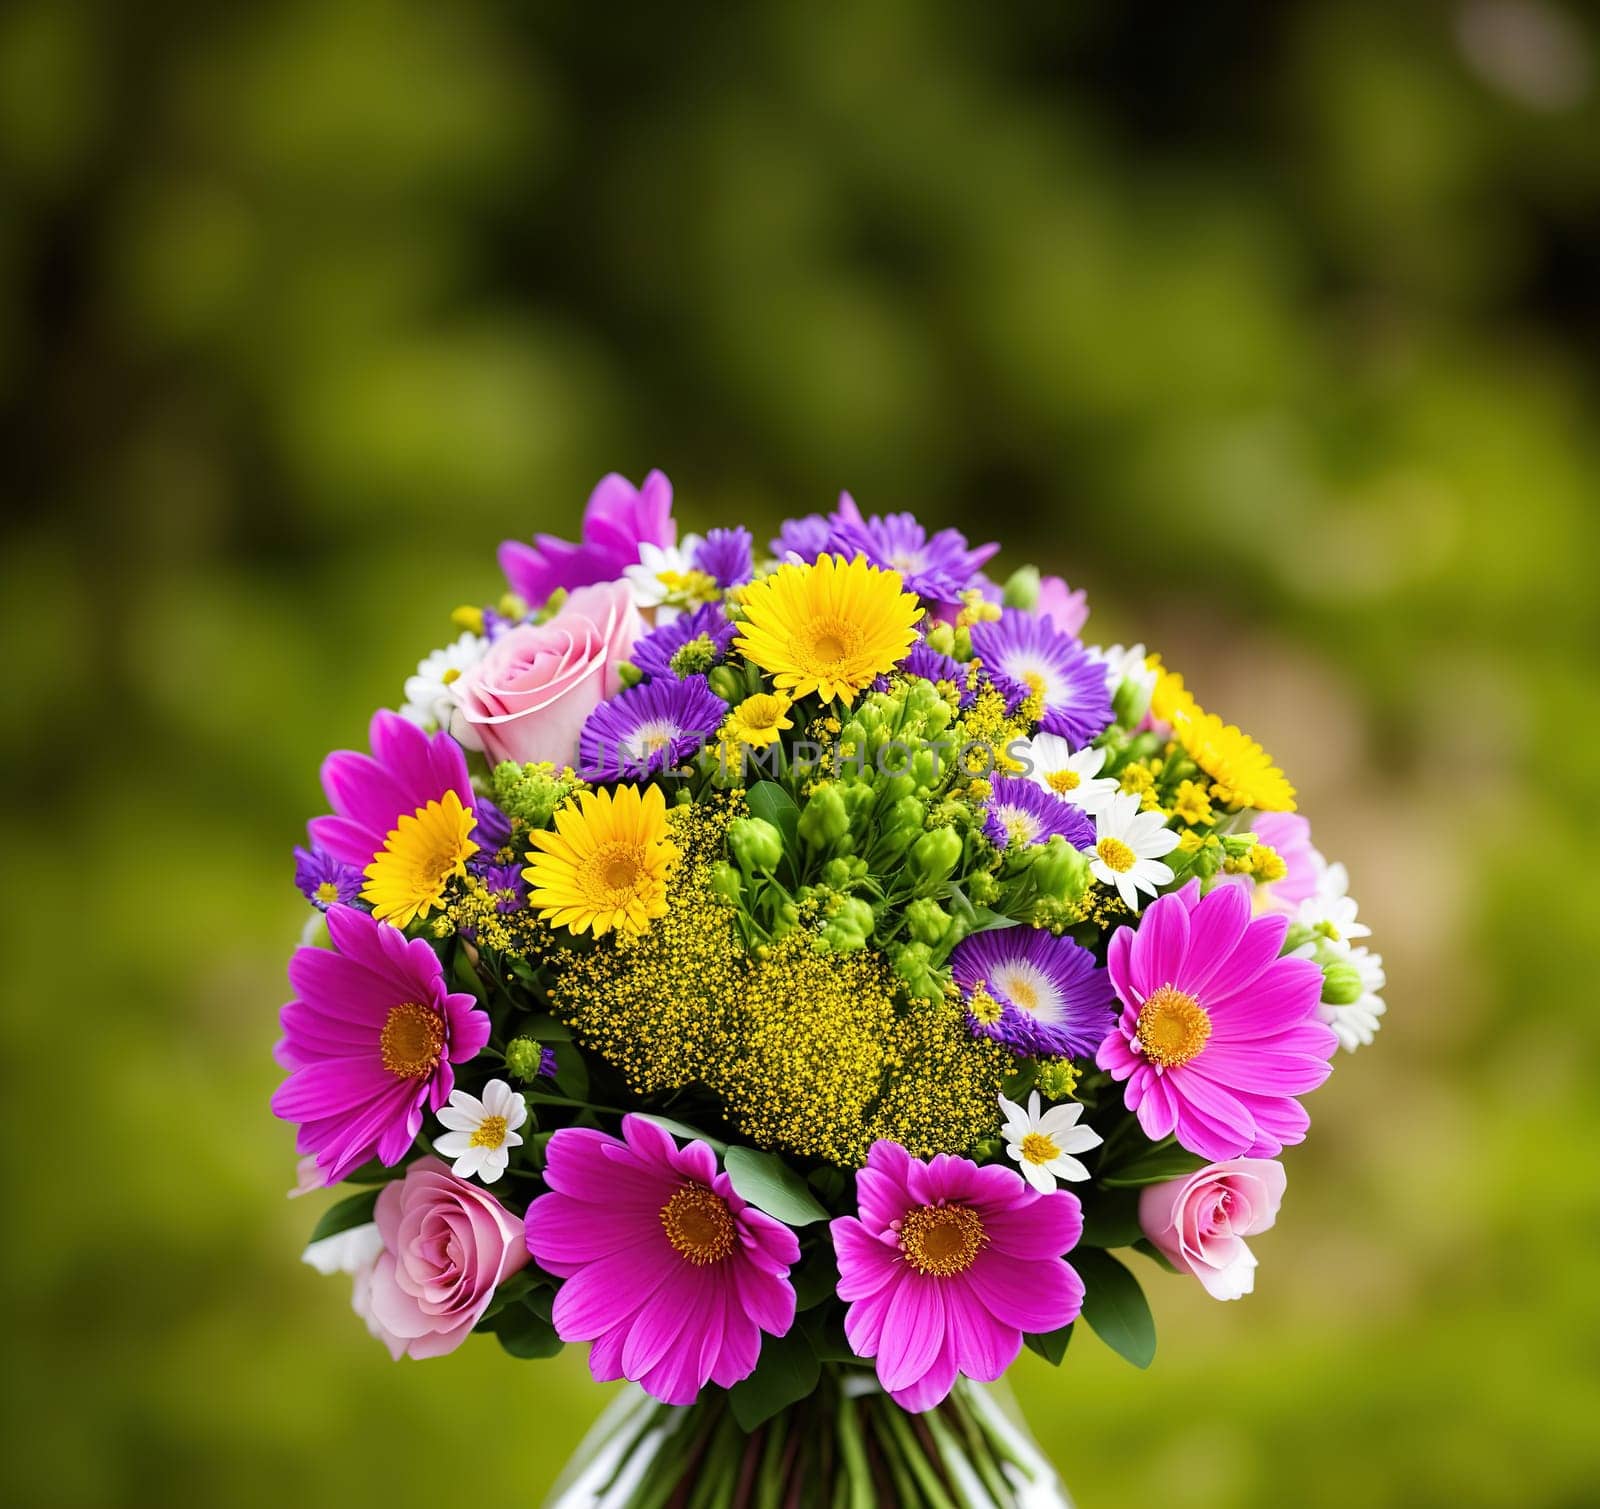 Present flower Bouquet isolated in green background by macroarting